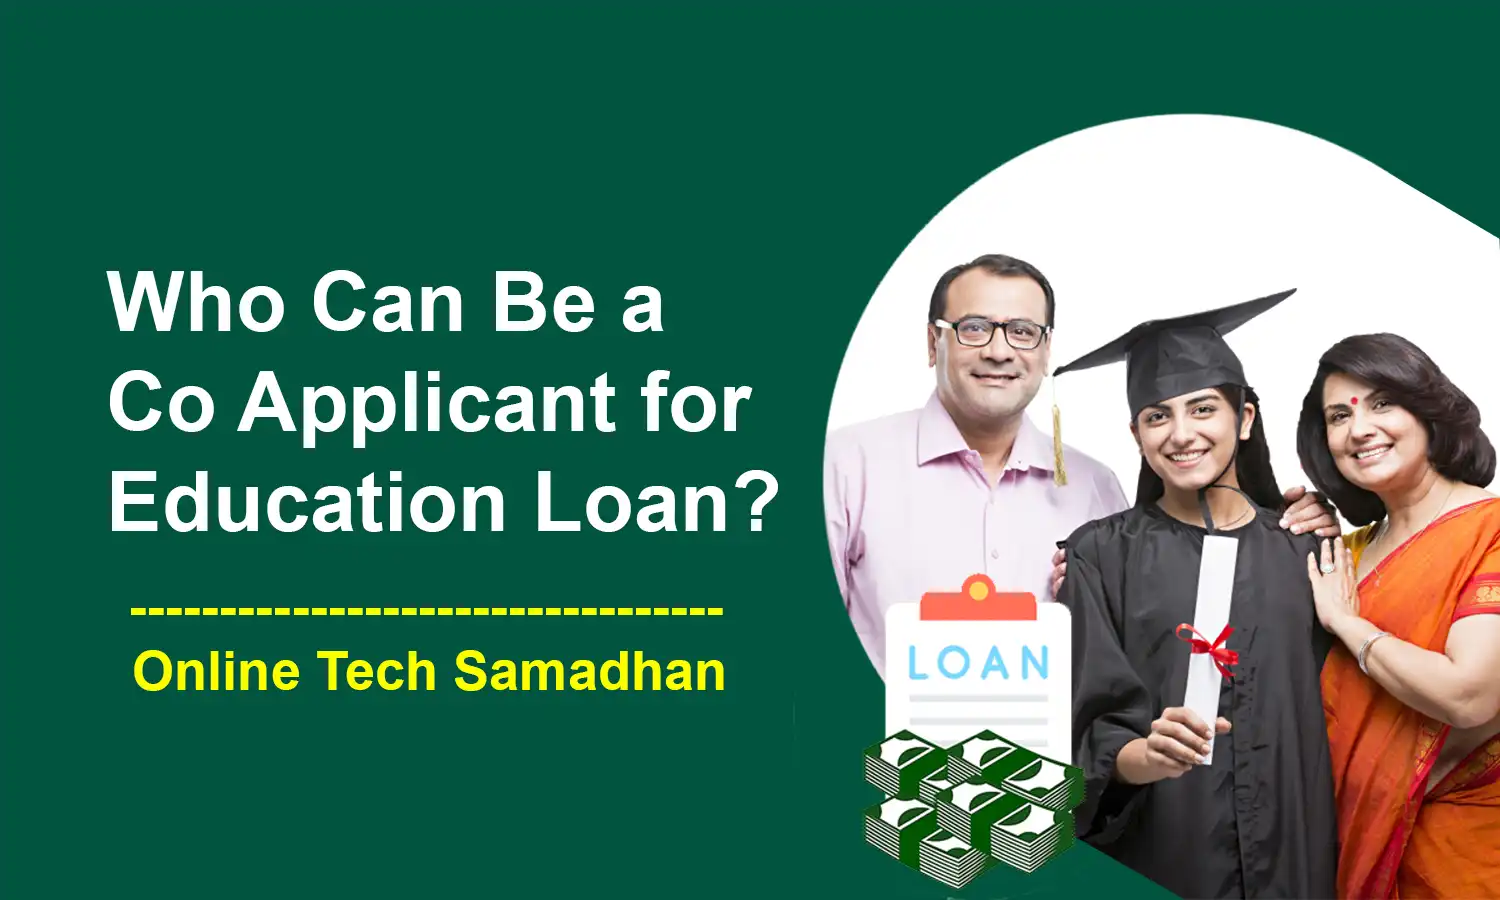 Who Can Be a Co Applicant for Education Loan